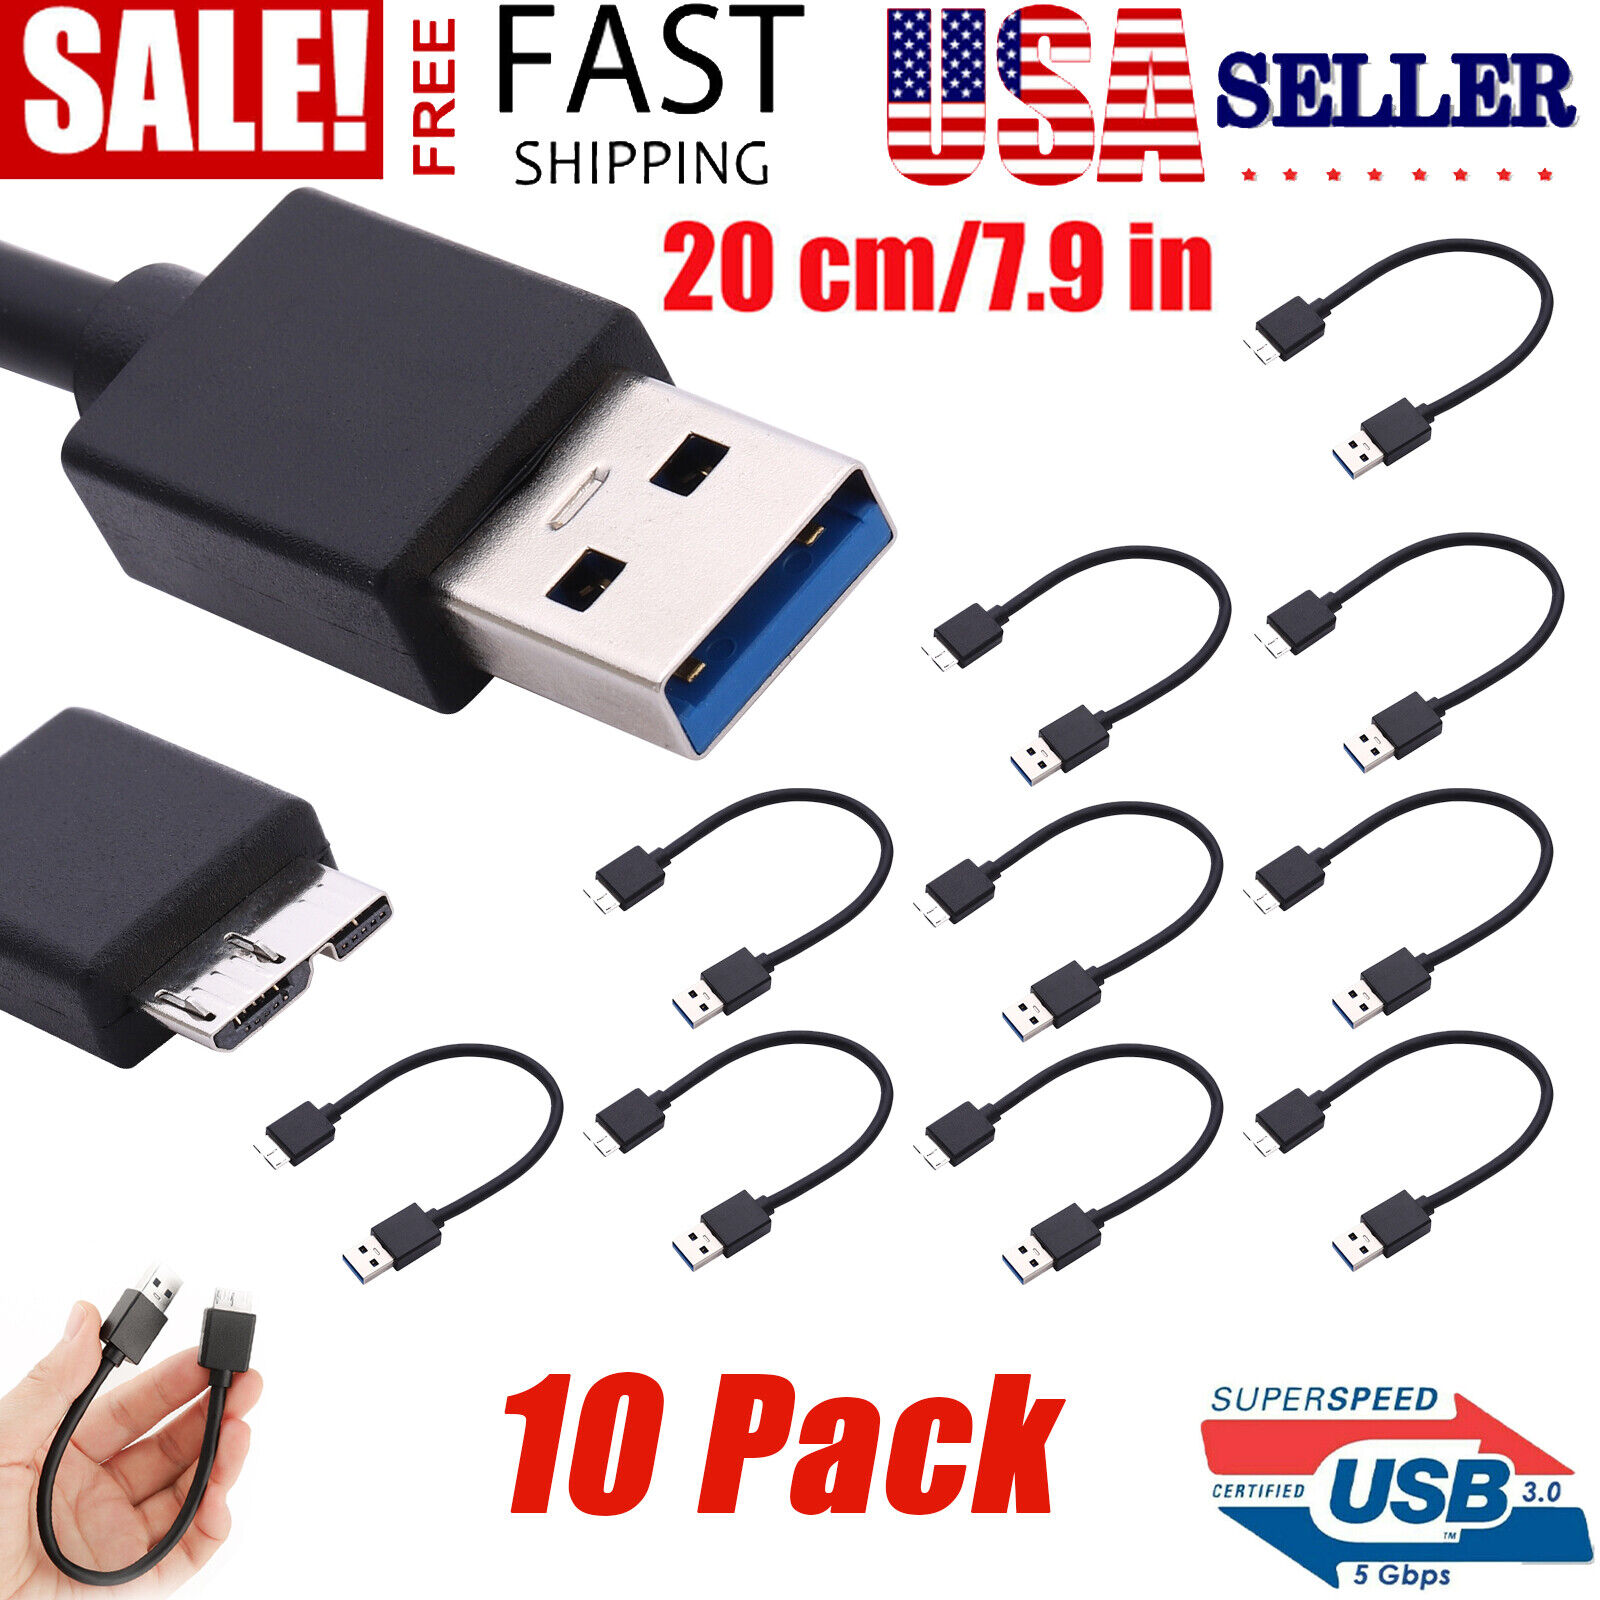 10 X Micro Usb 3.0 To Micro B Male Cable for Seagate Hard Drive Disk High Speed